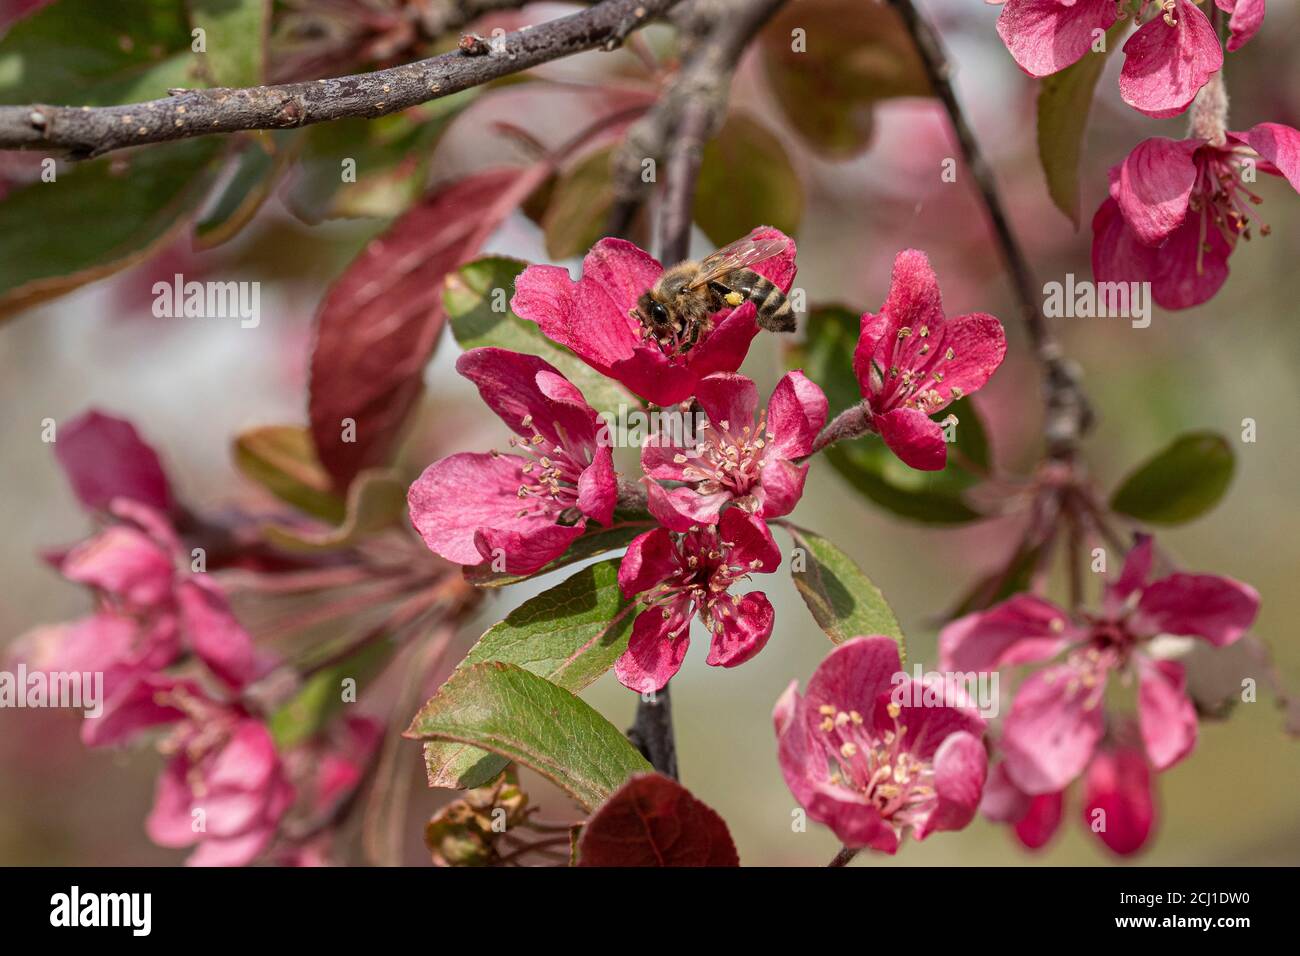 Ornamental apple tree (Malus 'Radiant', Malus Radiant), blooming branch of cultivar Radiant Stock Photo